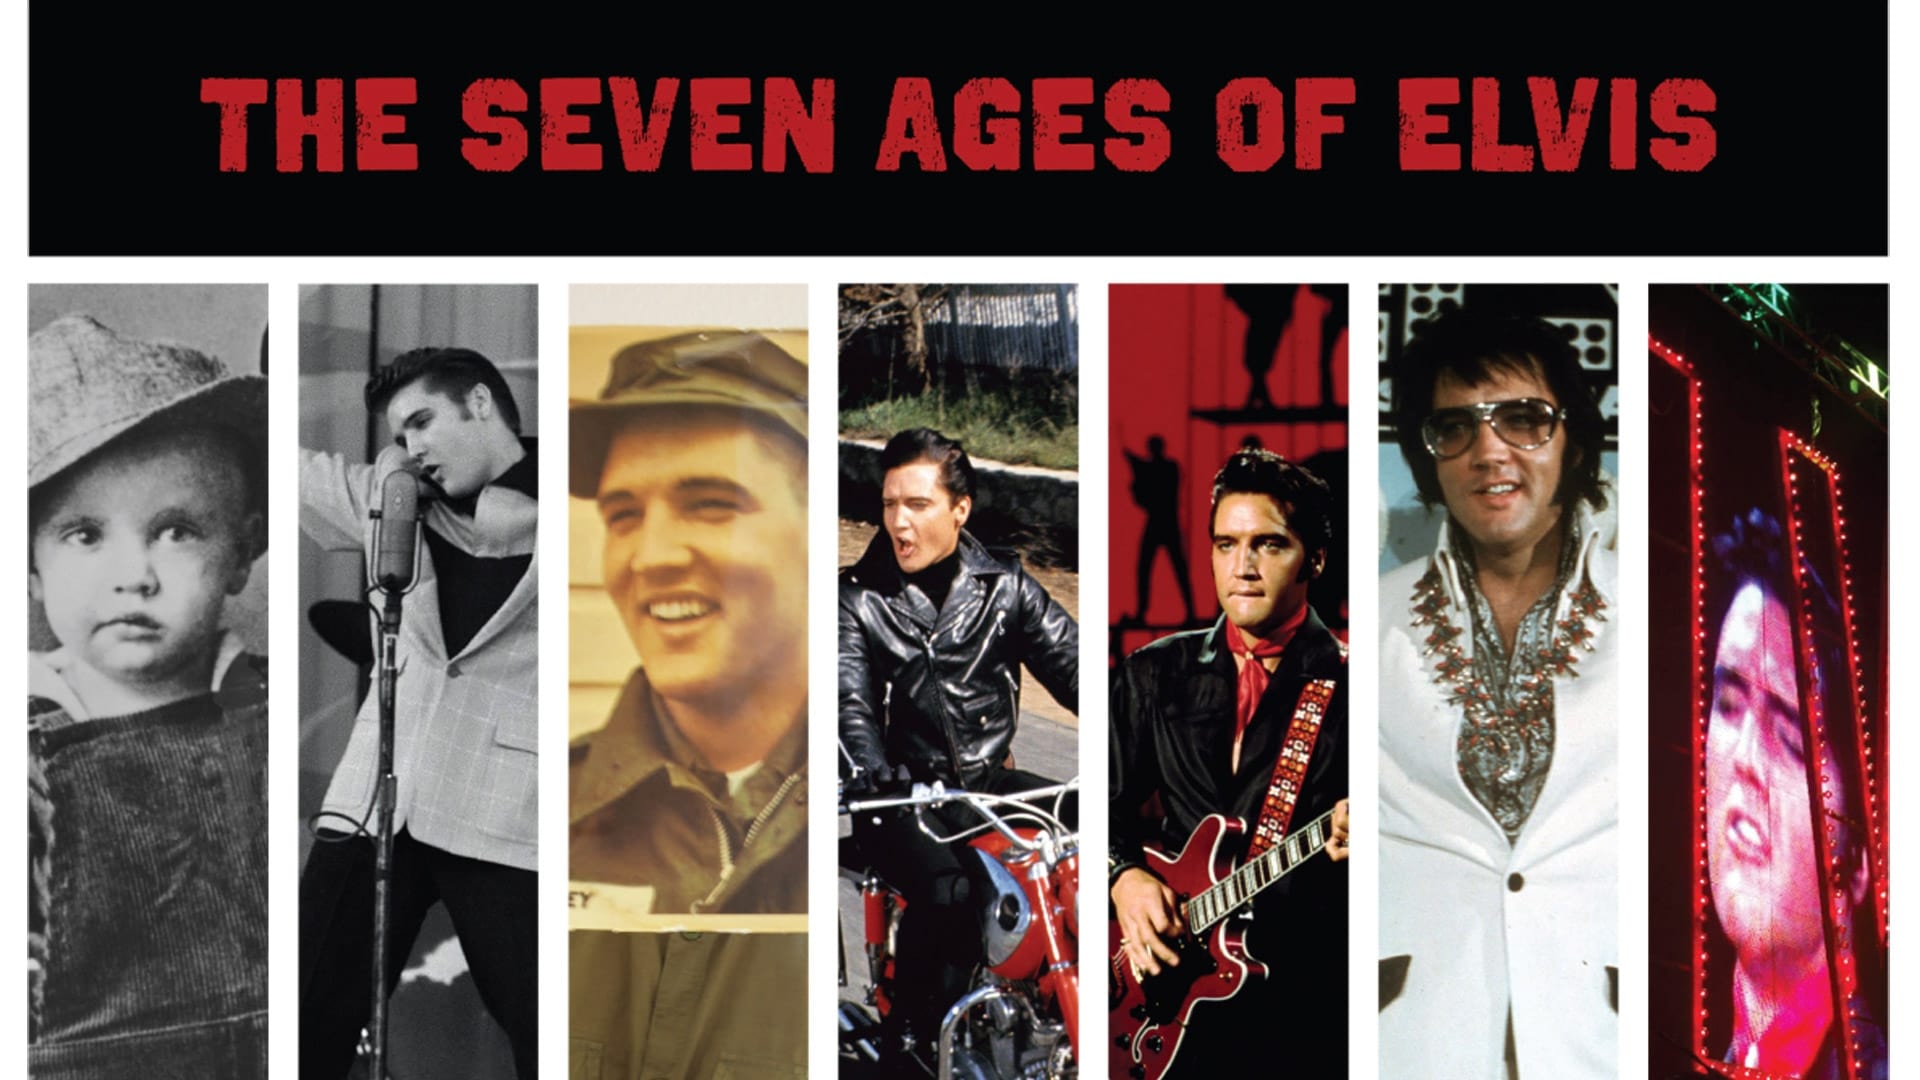 The Seven Ages of Elvis (2017)